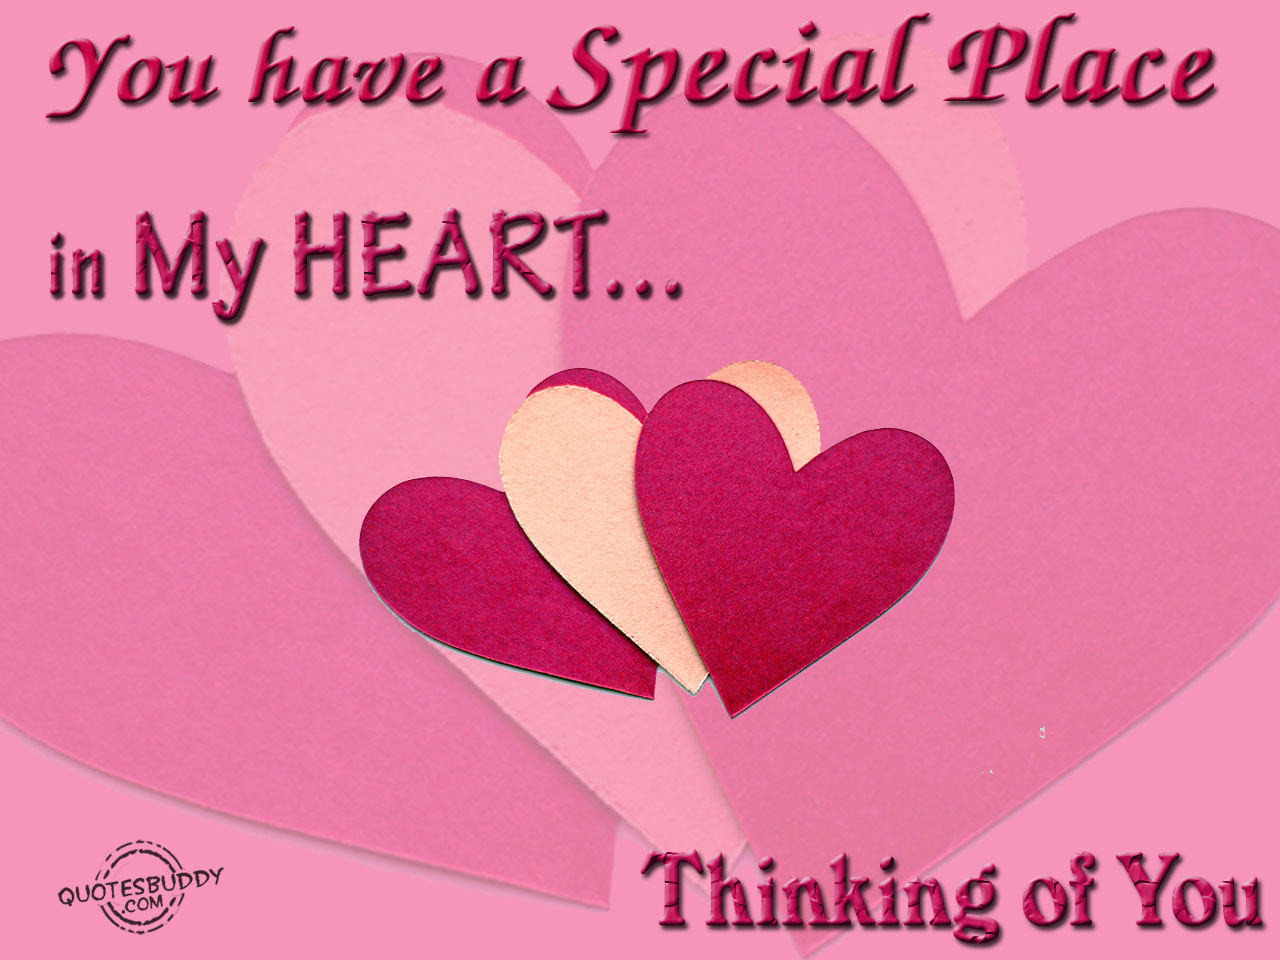 Thinking Of You Love Quotes
 You Have A Special Place In My Heart Thinking You